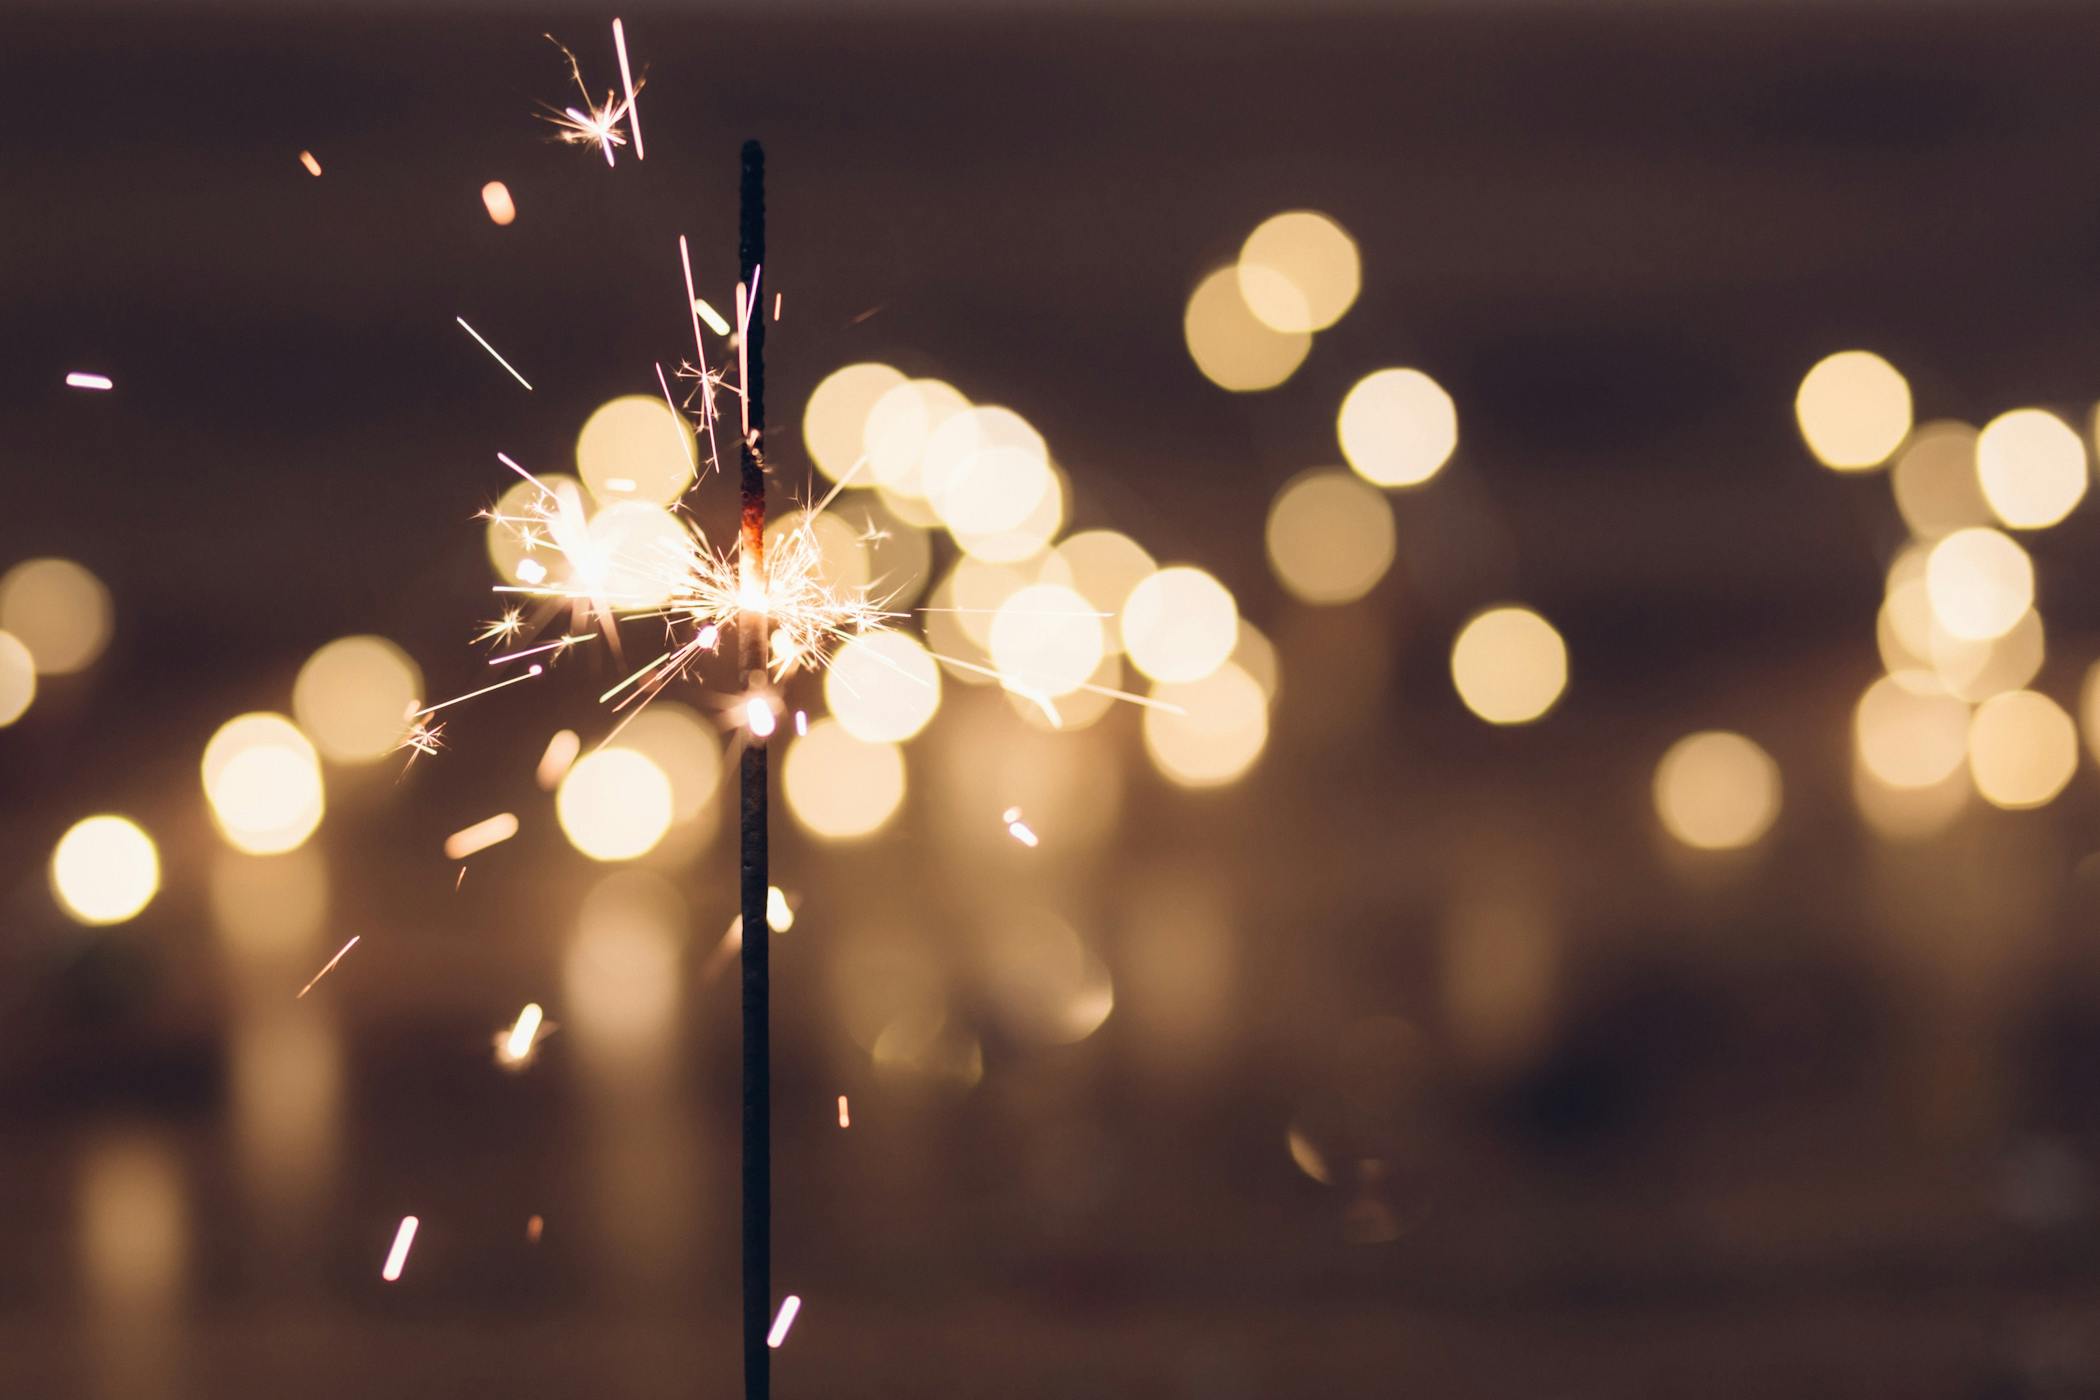 A lit sparkler with party lights in the background